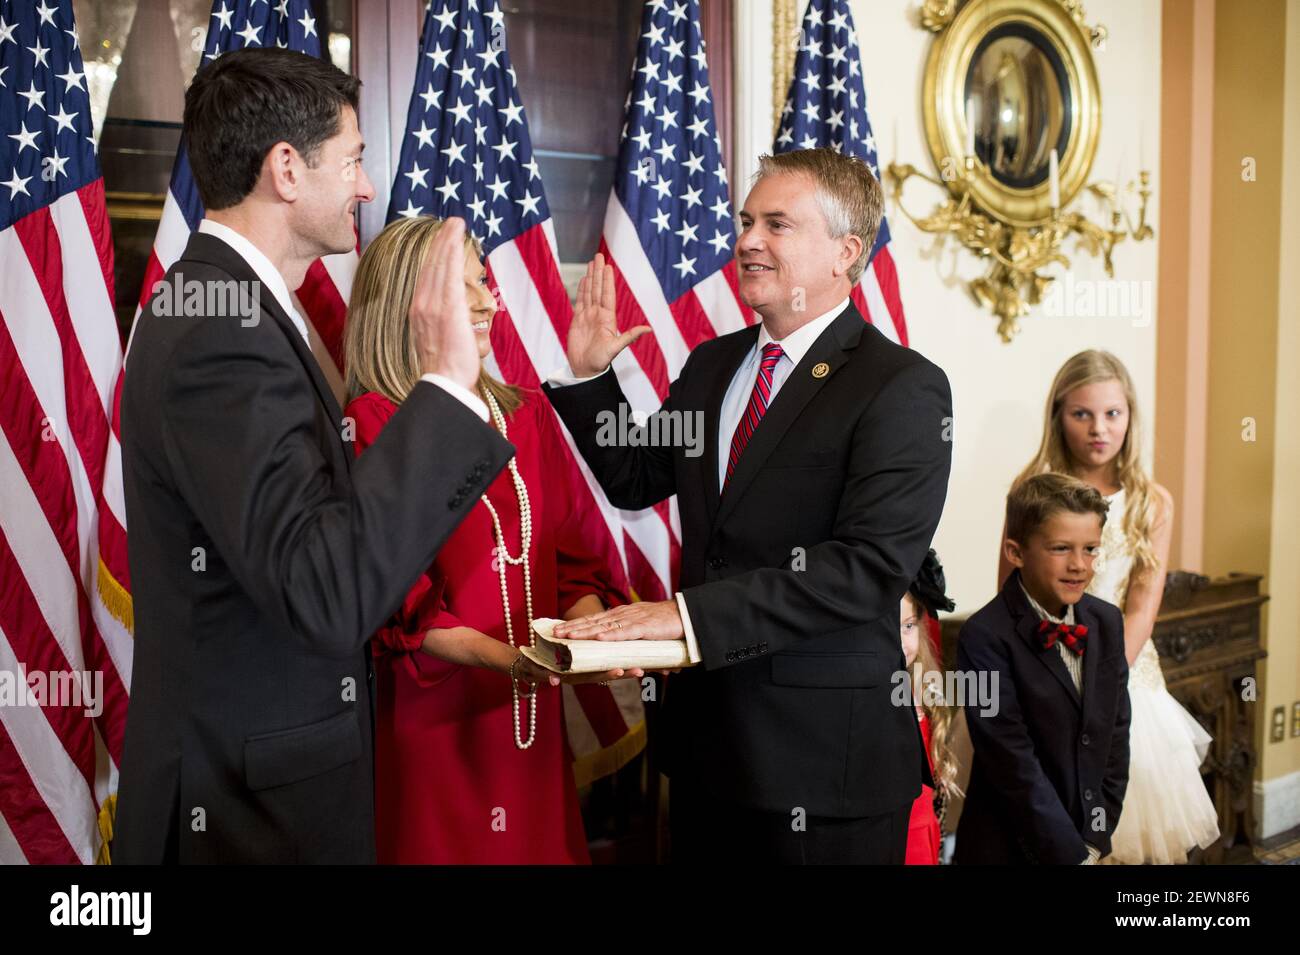 UNITED STATES - NOVEMBER 14: Rep. James Comer, R-Ky., poses with his family during his mock swearing-in ceremony with Speaker of the House Paul Ryan, R-Wisc., in the U.S. Capitol on Monday, Nov. 14, 2016.  Stock Photo